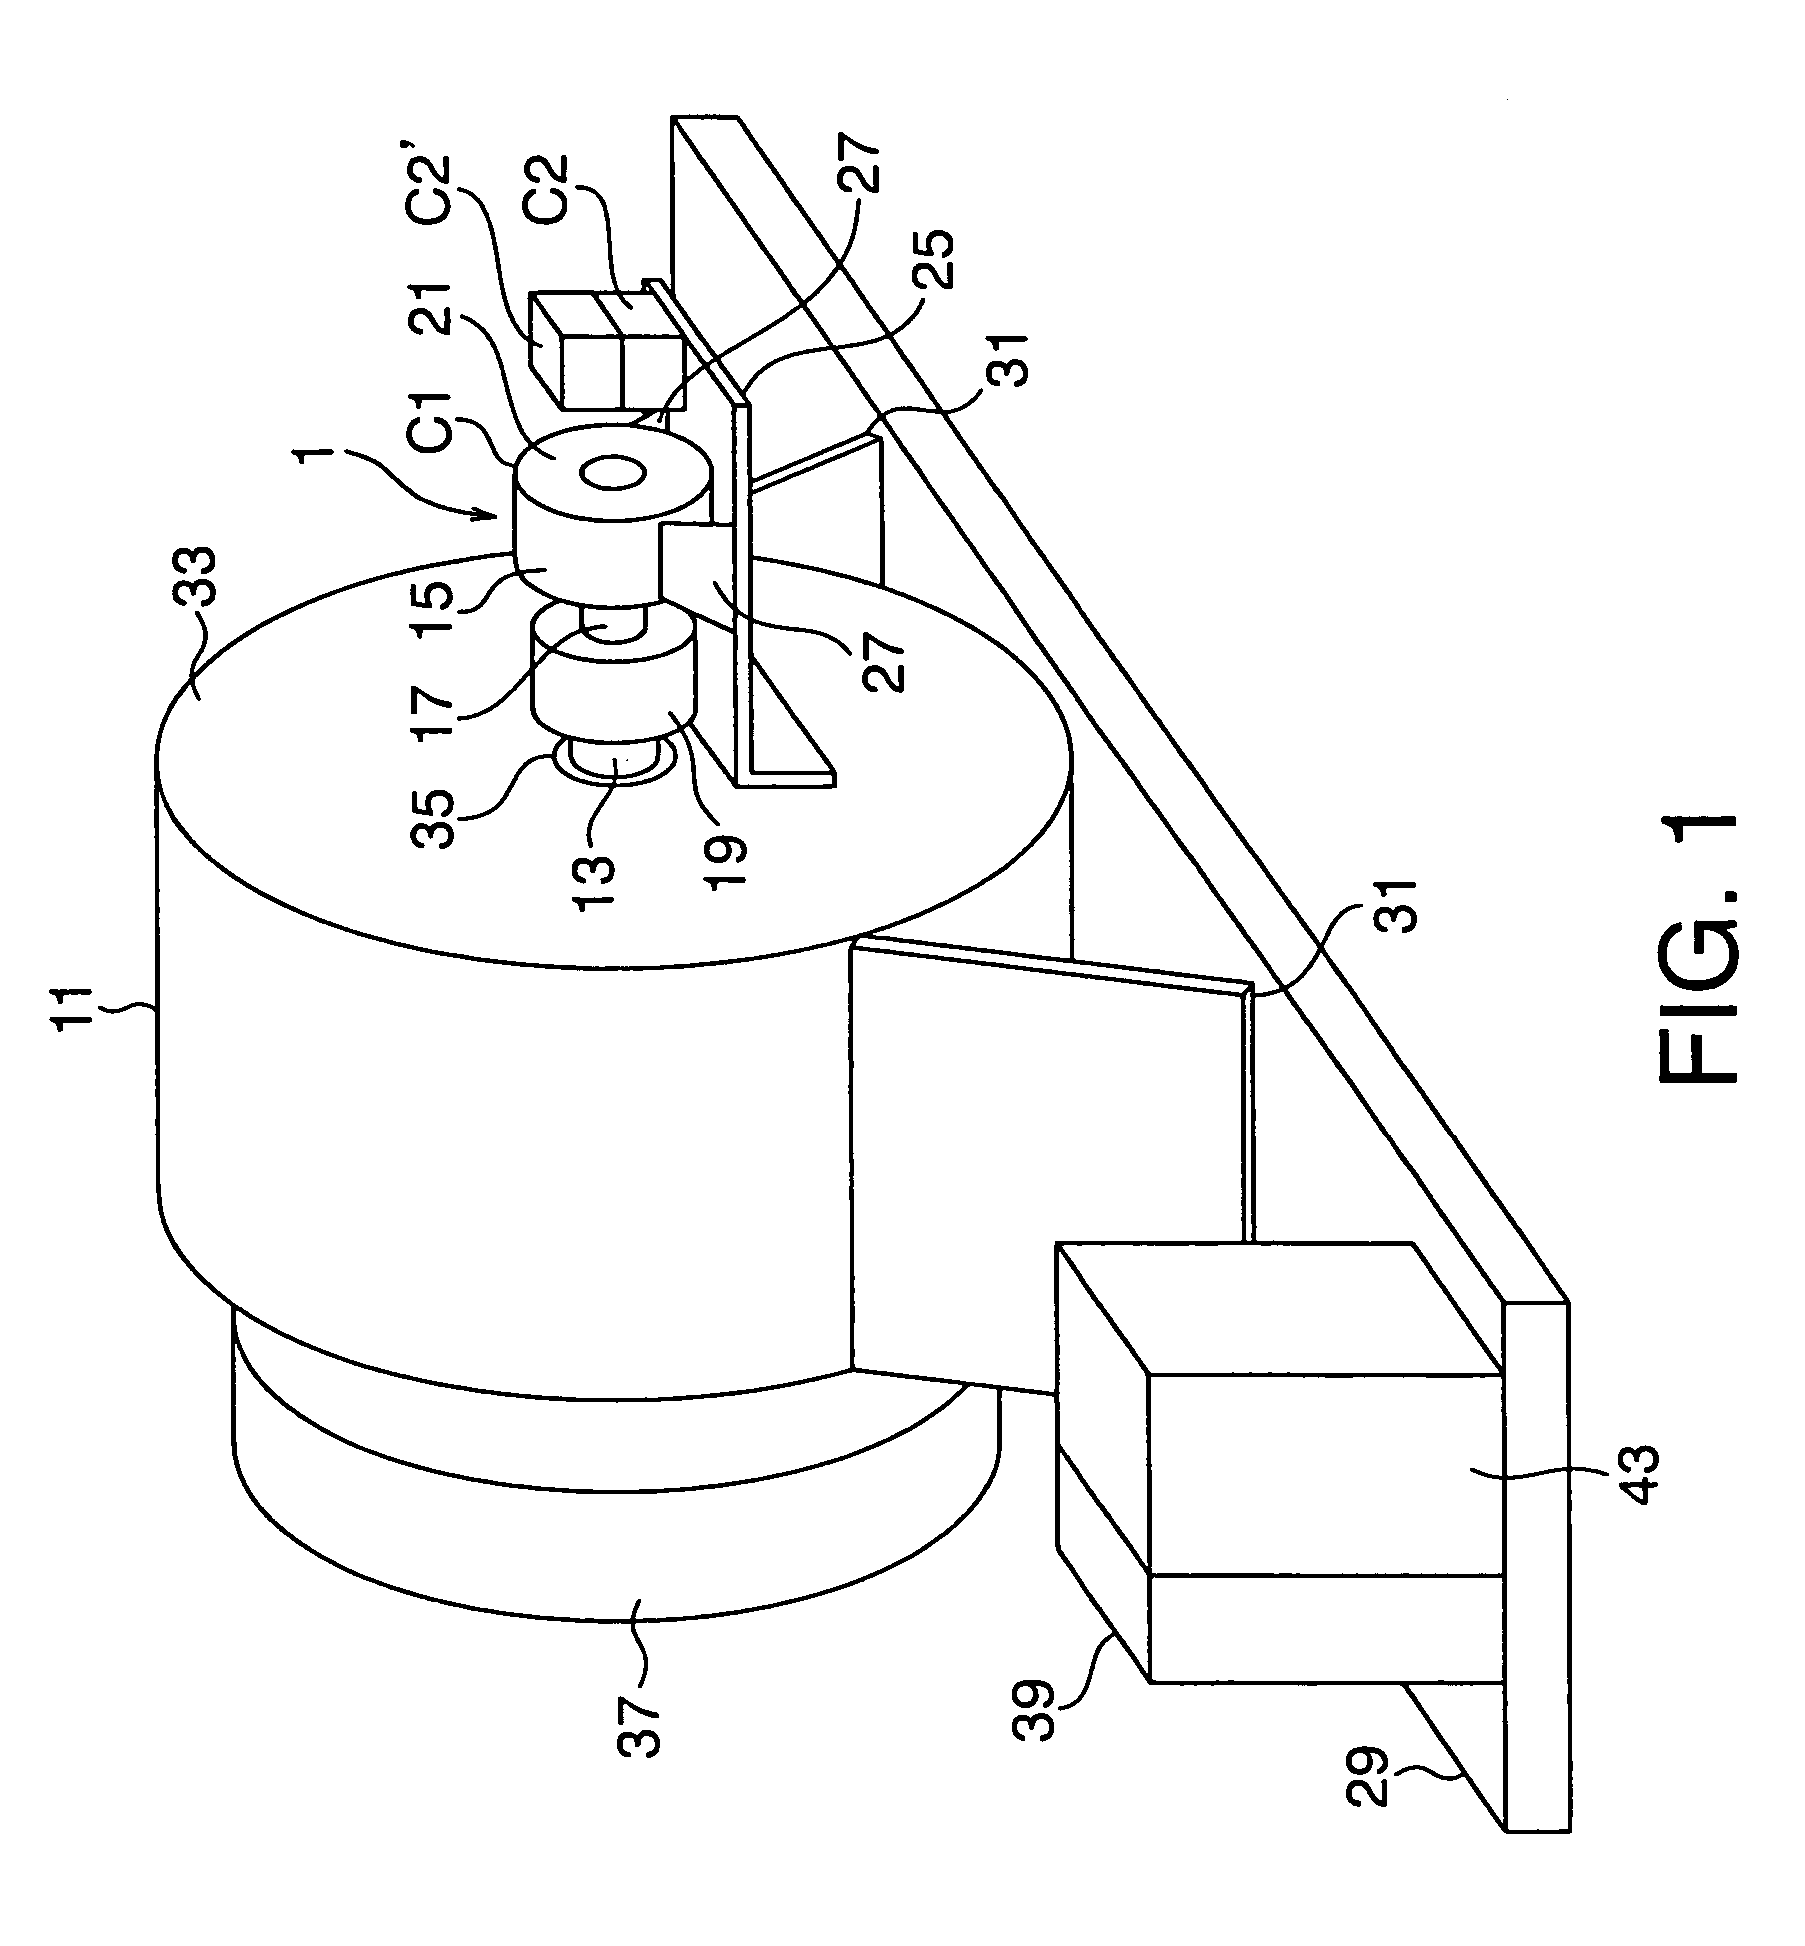 Rotational speed detector with ripple compensation